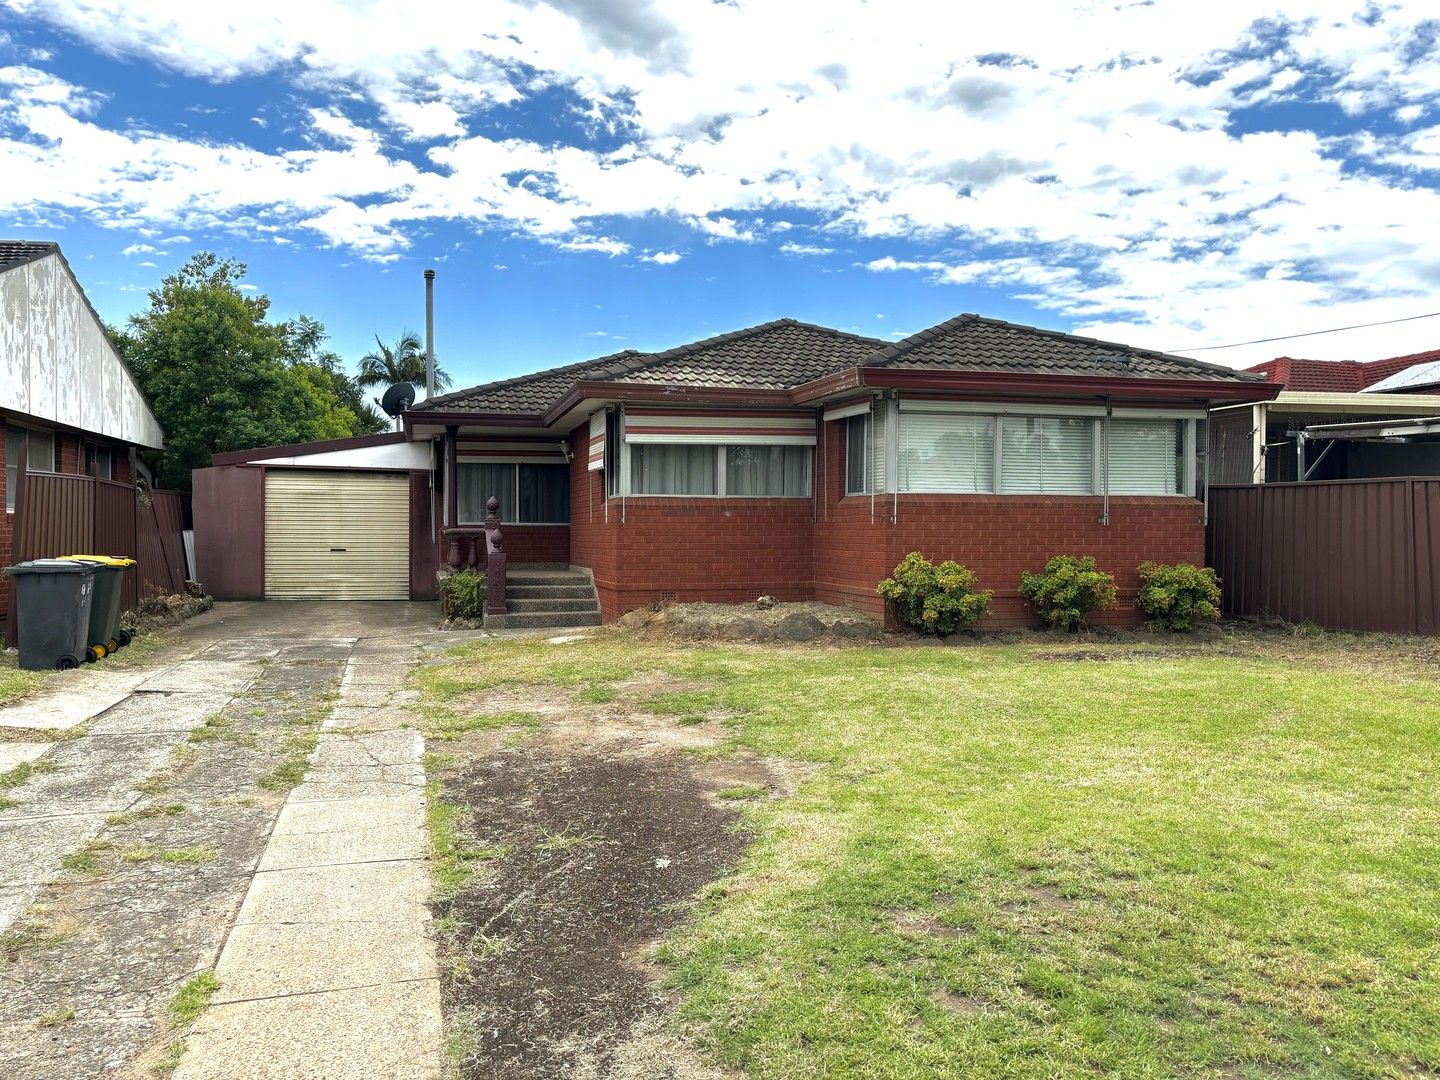 3 bedrooms House in 146 O'Sullivan Road LEUMEAH NSW, 2560